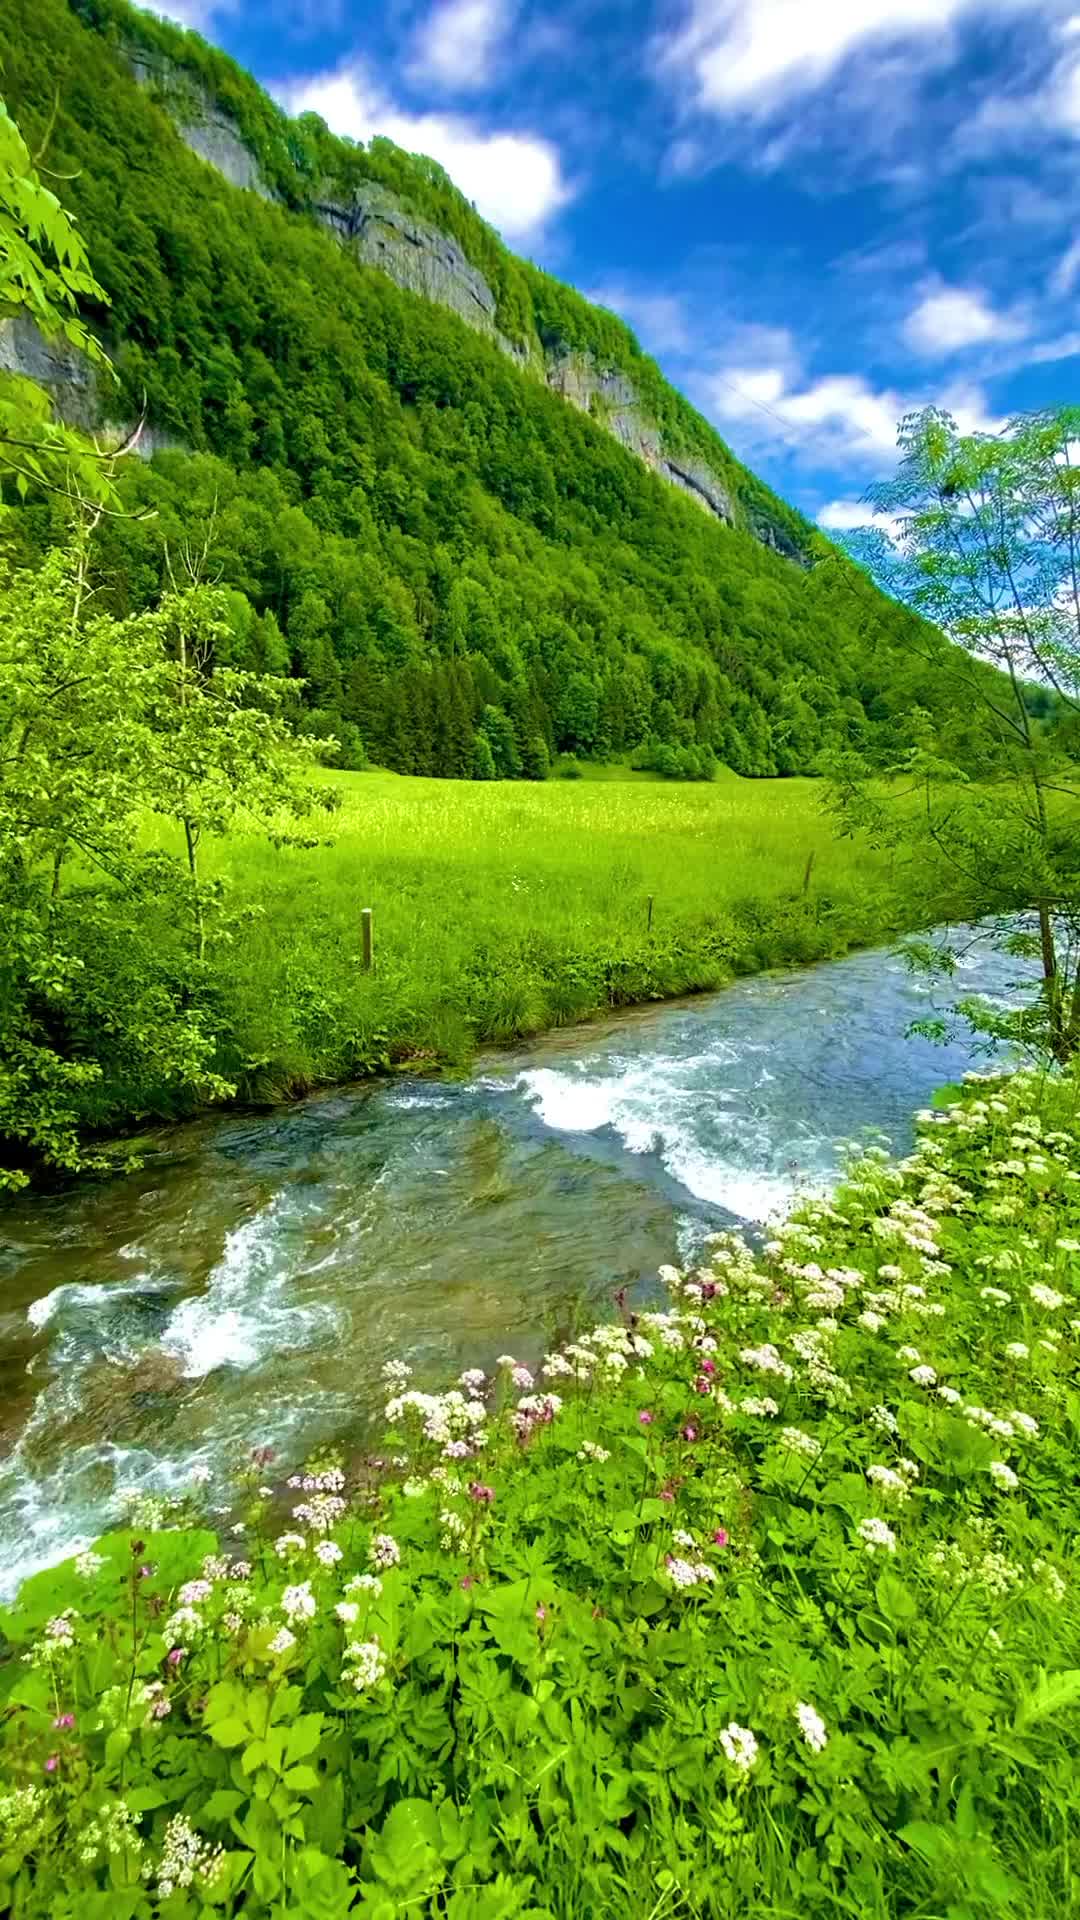 🇬🇧🇮🇩👇🇨🇭THE MOST BEAUTIFUL PLACE IN CANTON APPENZELL🇨🇭 EXACT LOCATION👇

🌸THIS PLACE IS EASY TO REACH, NO HIKE NEEDED 

🌸FEW STEPS FROM TRAIN STATION YOU WILL SEE THIS :

🌸SPECTACULAR MOUNTAINS, CRYSTAL CLEAR STREAM, GREEN HILLS & MEADOWS 

🌸THE REAL TYPICAL IDYLLIC REPRESENTATION OF SWITZERLAND 🇨🇭 

📍WASSERAUEN, CANTON APPENZELL🇨🇭

💜FOLLOW @syifa_in_switzerland TO MAXIMIZE YOUR TRIP IN SWITZERLAND🇨🇭

💜SAVE & SHARE this reel for YOUR NEXT SWISS TRIP🇨🇭✈️

💜WATCH MY IG STORY NOW FOR ITINERARY & TRAVEL TIPS IN SWITZERLAND 

#swiss #syifainswitzerland #schweizeralpen #suíça #suisse #suiza #svizzera #switzerlandtourism #swissblogger #swissinfluencer #switzerland #ineedswitzerland #inlovewithswitzerland #switzerlandguide #bestofswitzerland #appenzell #wasserauen #schweizeralpen #myswitzerland #countryside #cottagecore #beautifuldestinations #İsviçre  #switzerlandtour  #swissguide  #visitswitzerland  #szwajcarski  #suisse